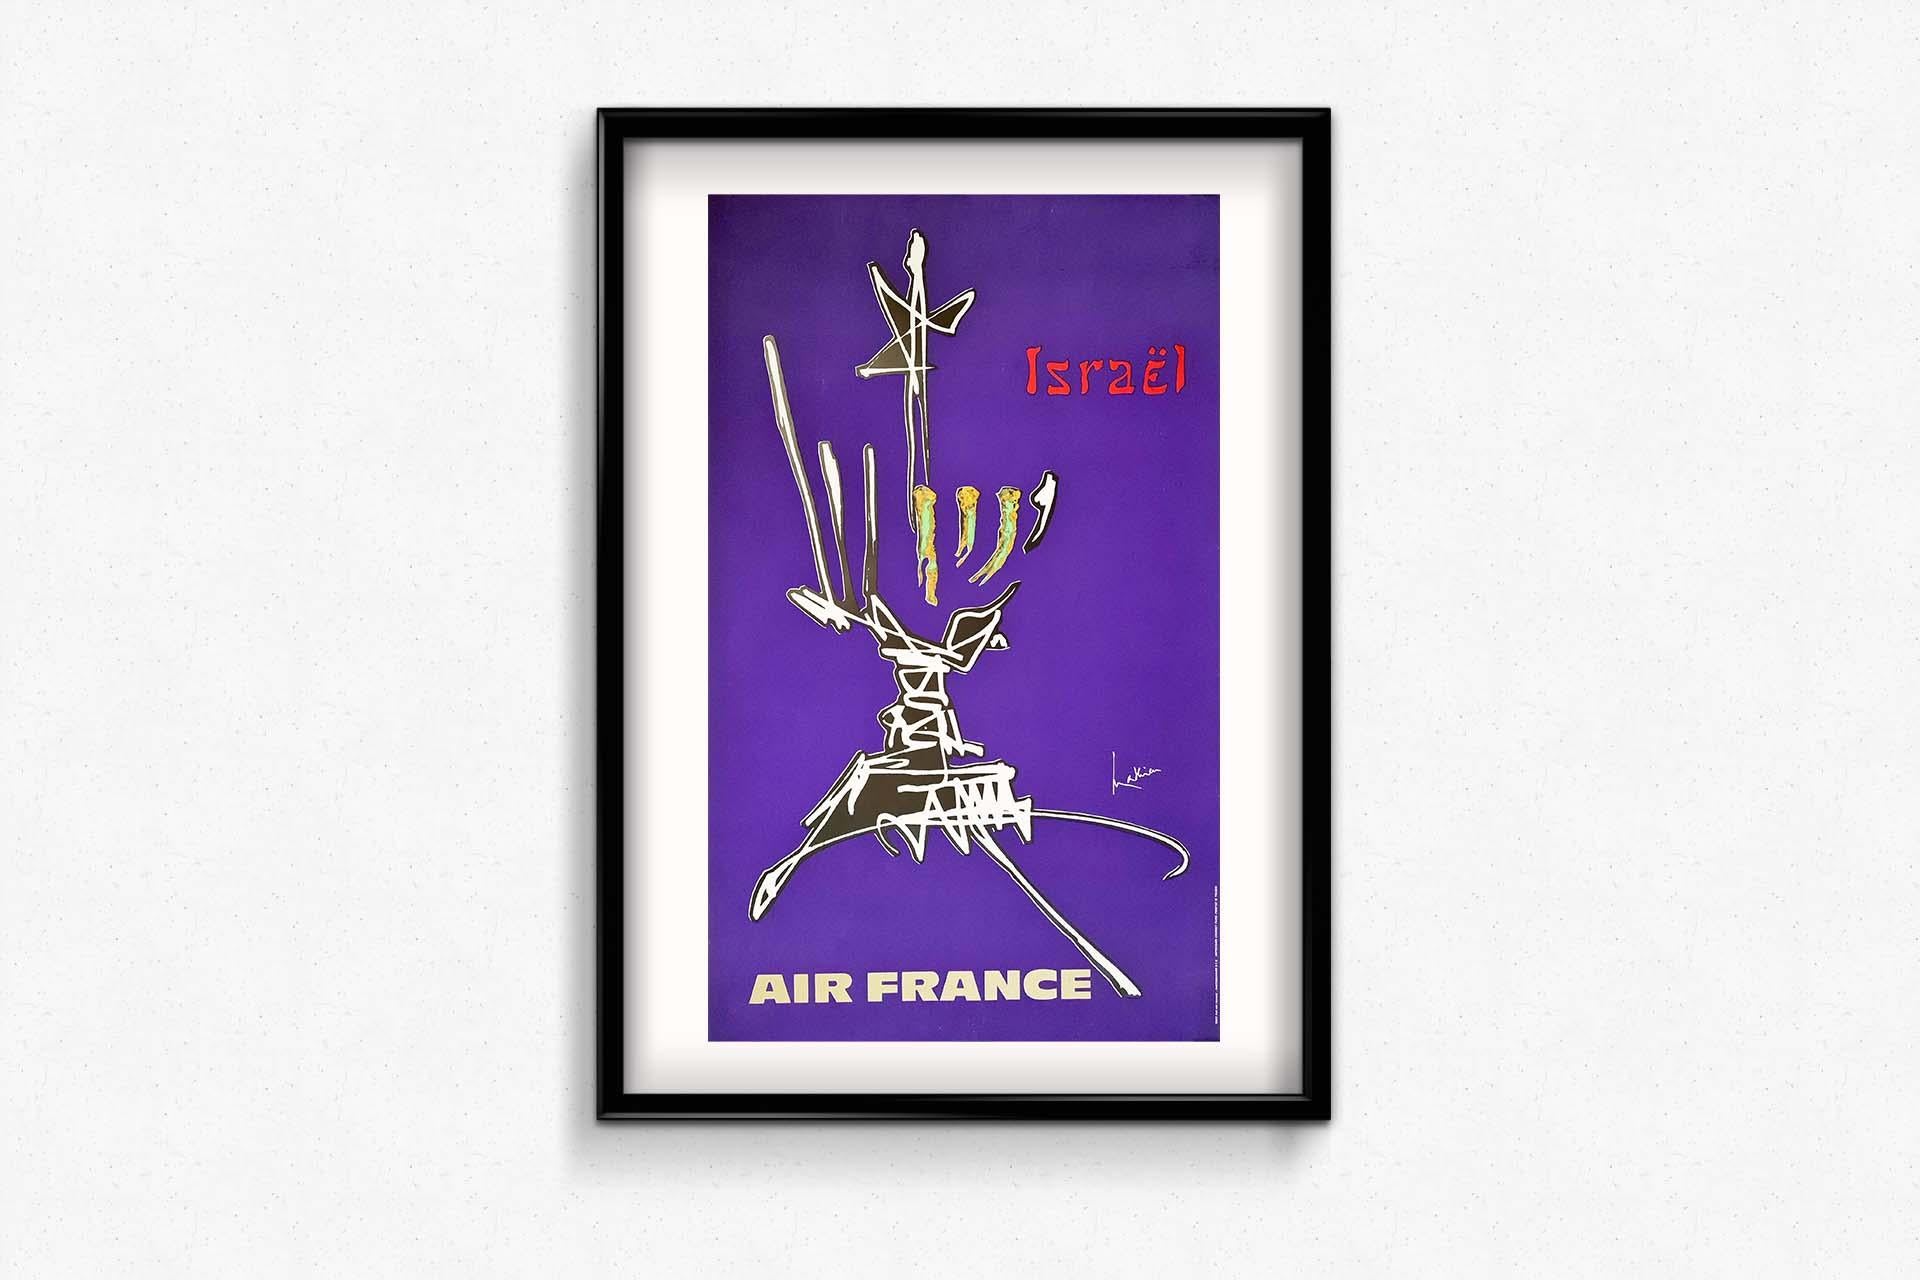 Georges Mathieu, French painter and designer, the master of Art Informel, a movement linked to post-war modern painting, produced a series of 16 posters for Air France in 1968.
This one is for Israel, suggesting the Star of David and the 7 branches